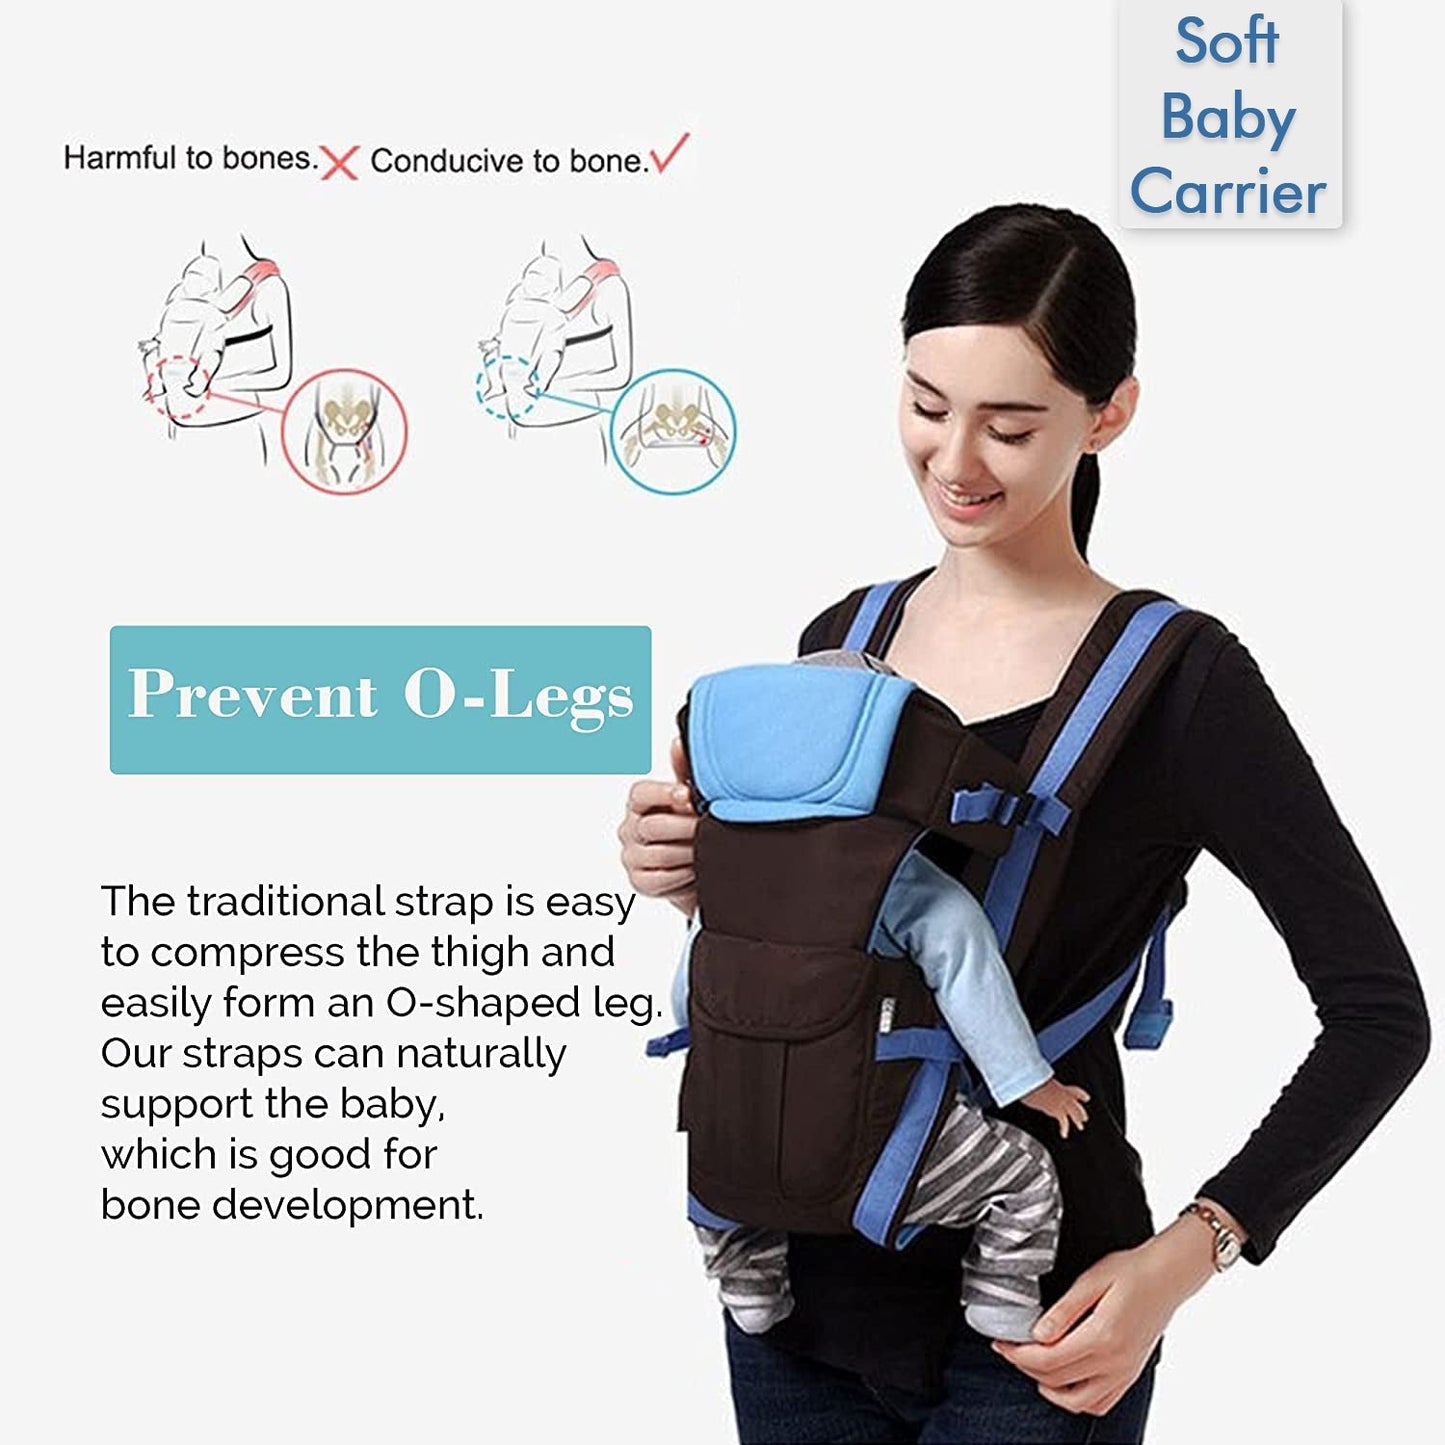 Baby Carrier Bag / Baby Holder Carrier with Four Modes of Use, Adjustable Sling and Easy to Use Design